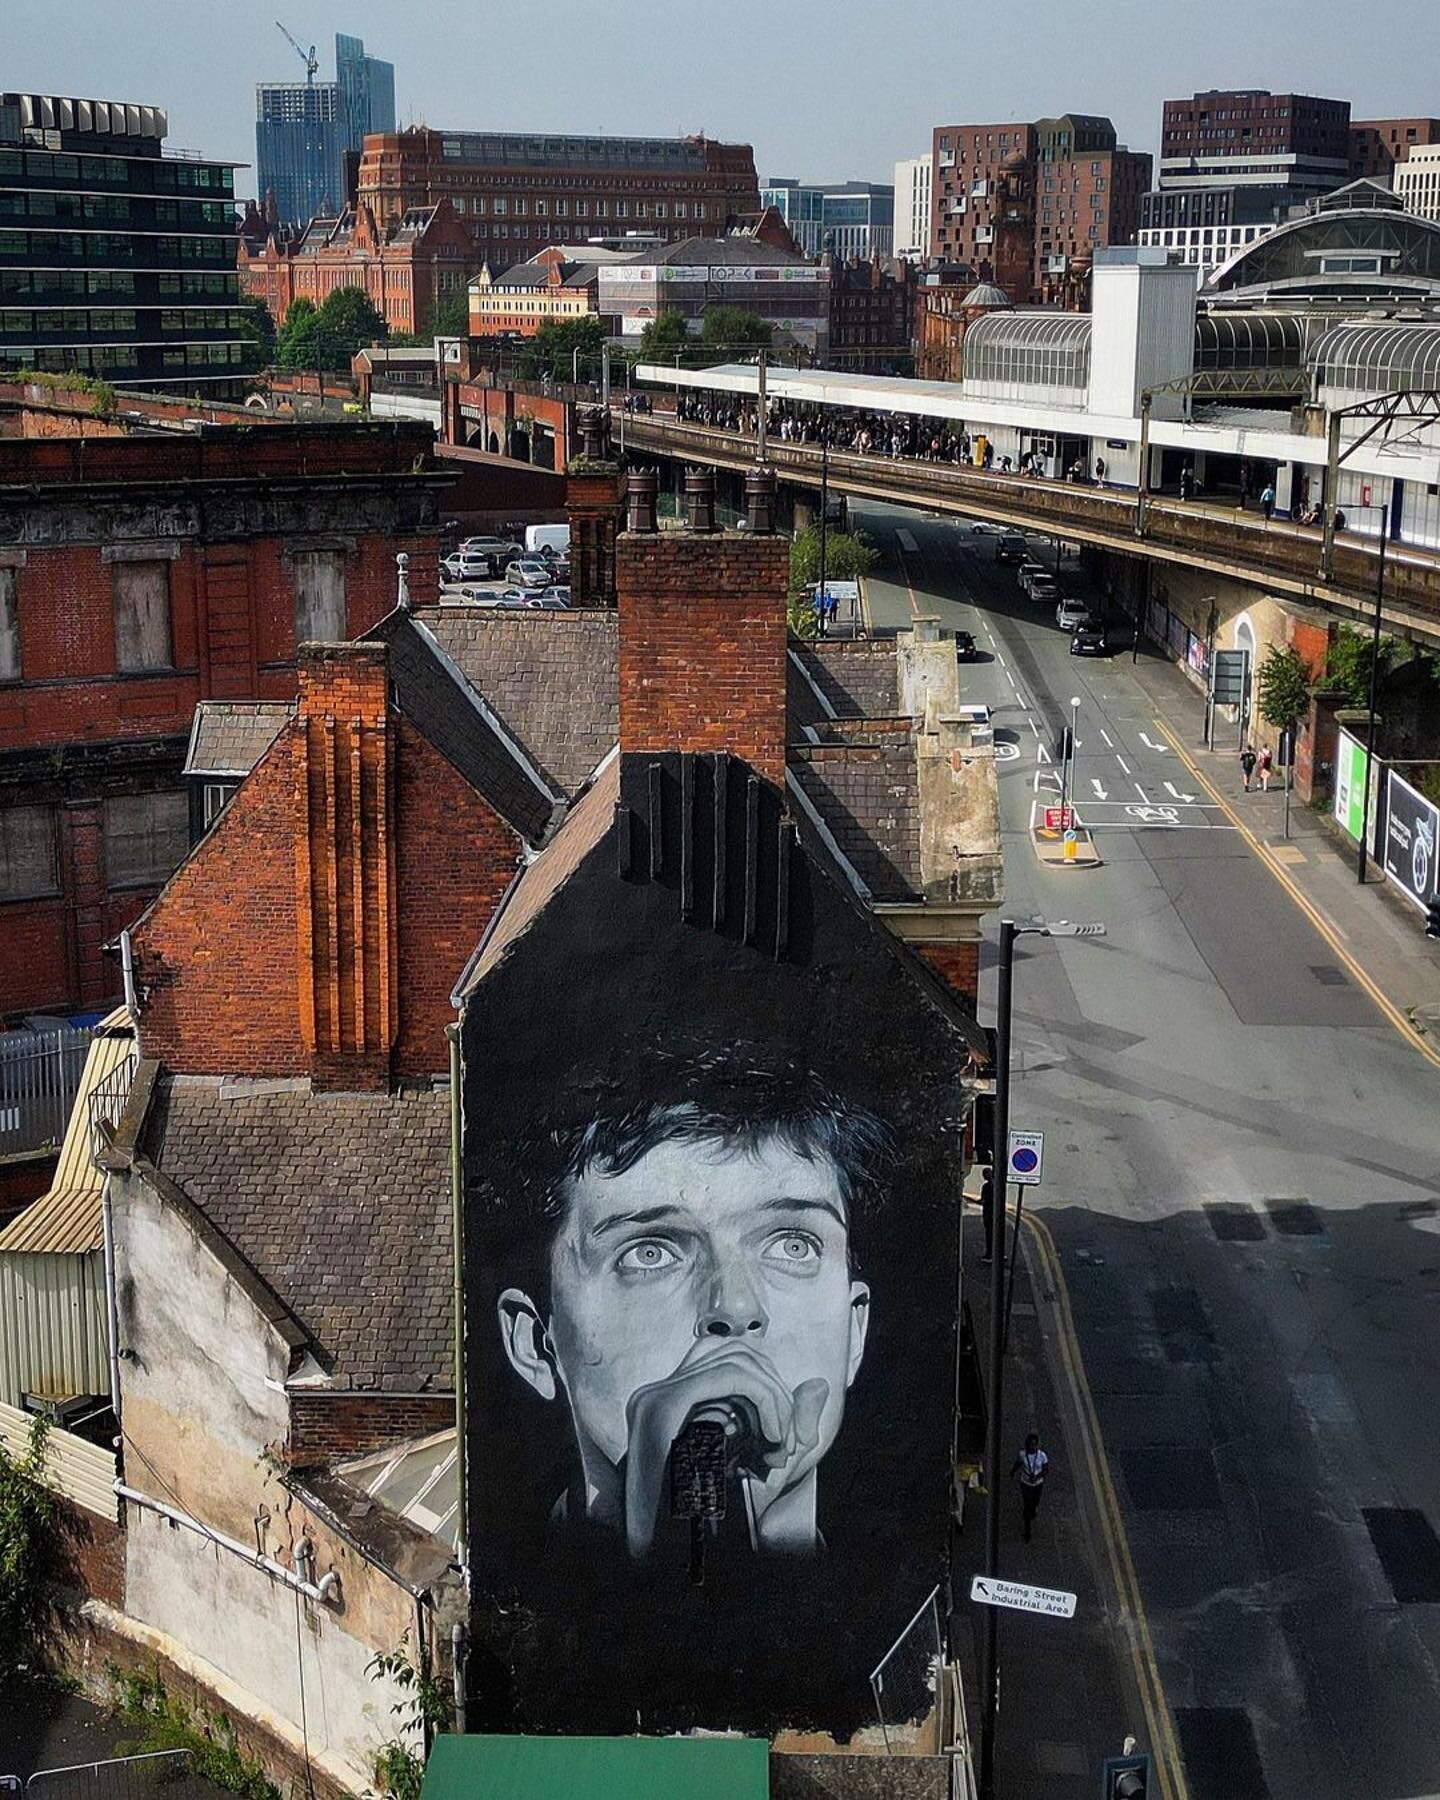 A mural of Joy Division's Ian Curtis in Manchester has been repainted after its mistaken erasure last year by an Amazon Music ad. 

📷 by Christopher Furlong/Getty Images

@OfficialJoyDivision #JoyDivision #IanCurtis #goth #rock